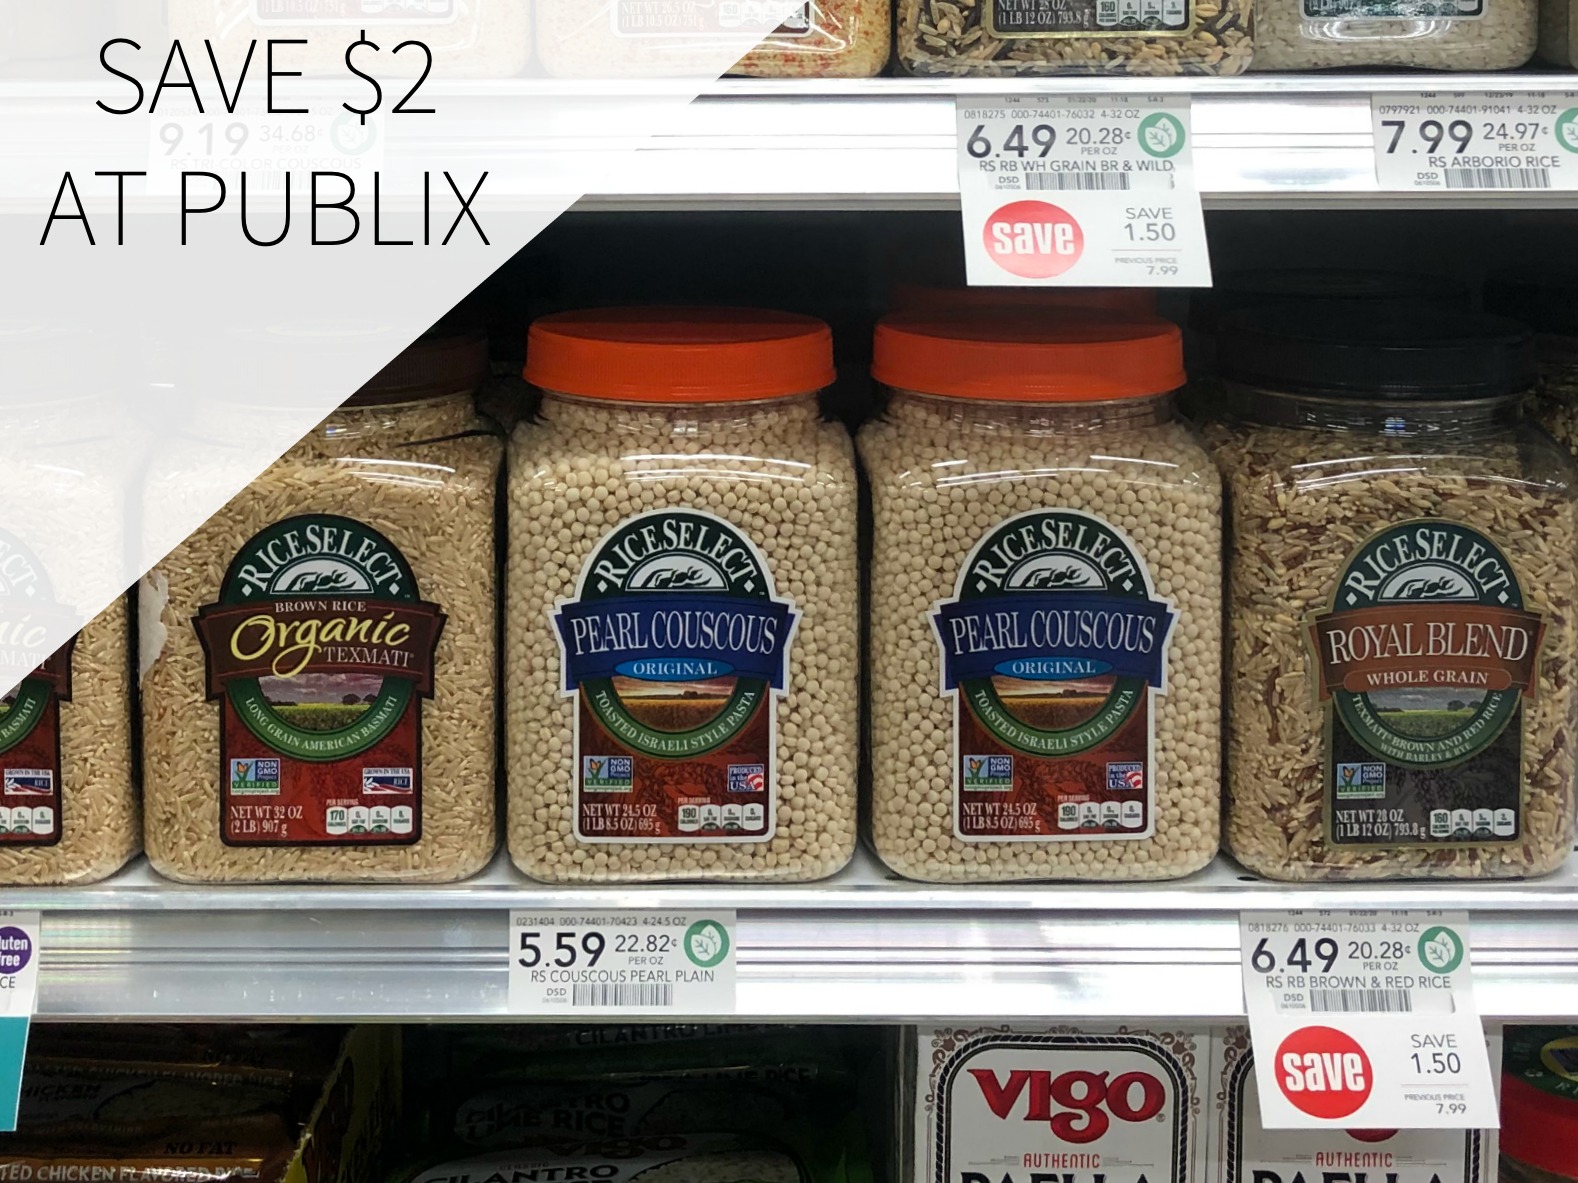 Stock Up On Your Favorite RiceSelect® Products – Save $2 With The Ibotta Offer At Publix